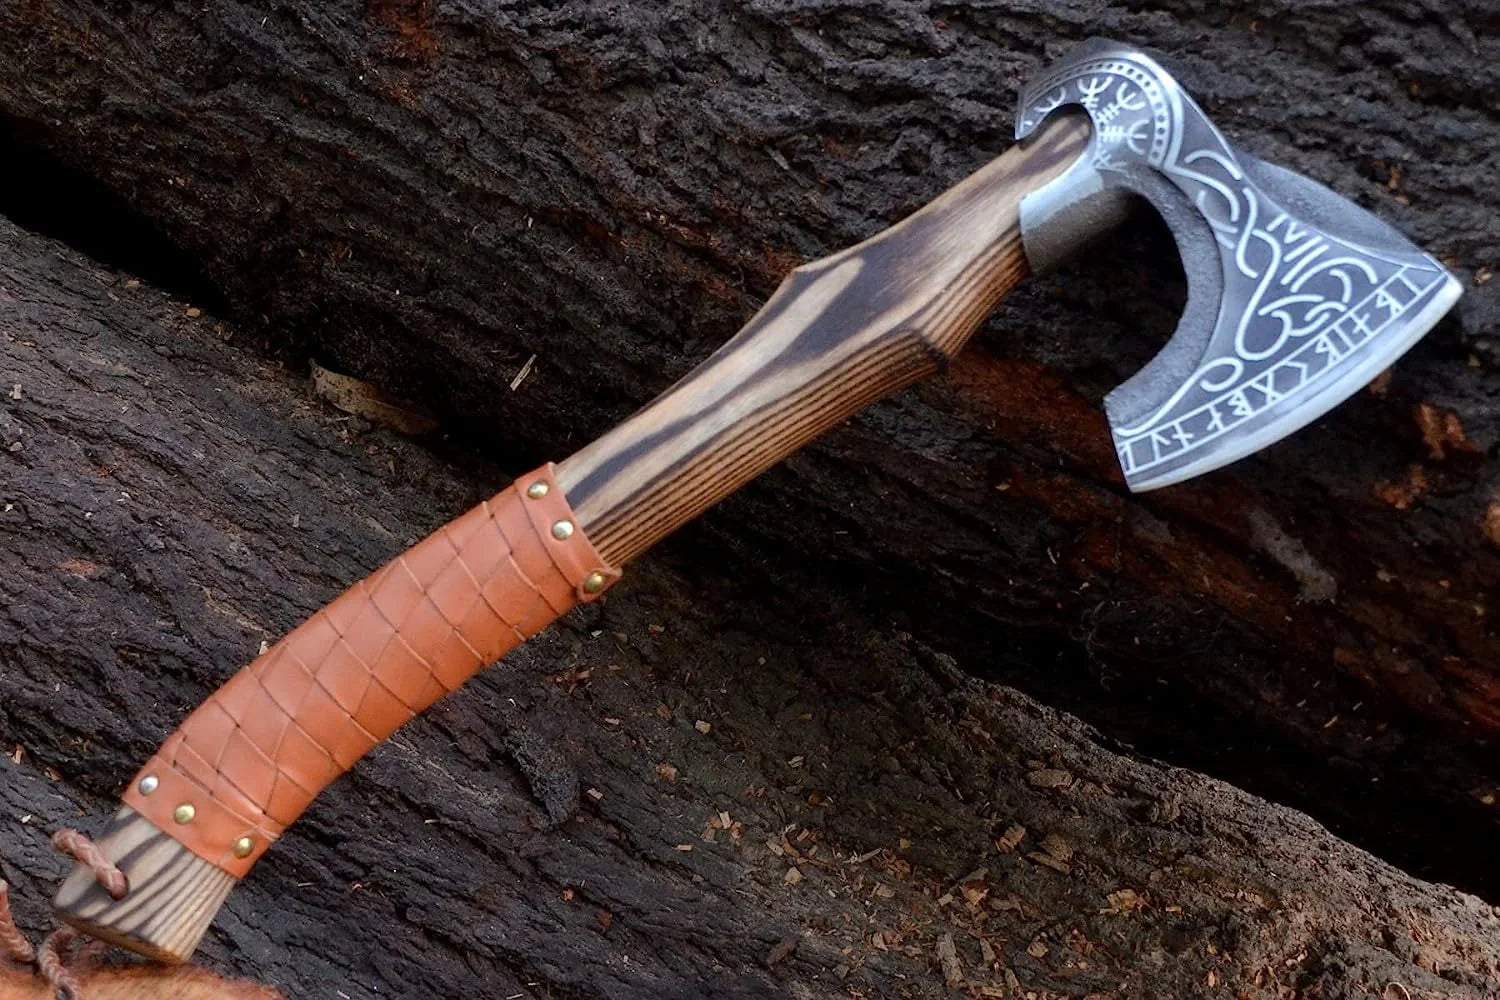 Forged in Battle: Exploring the Viking Hand Axe Legacy